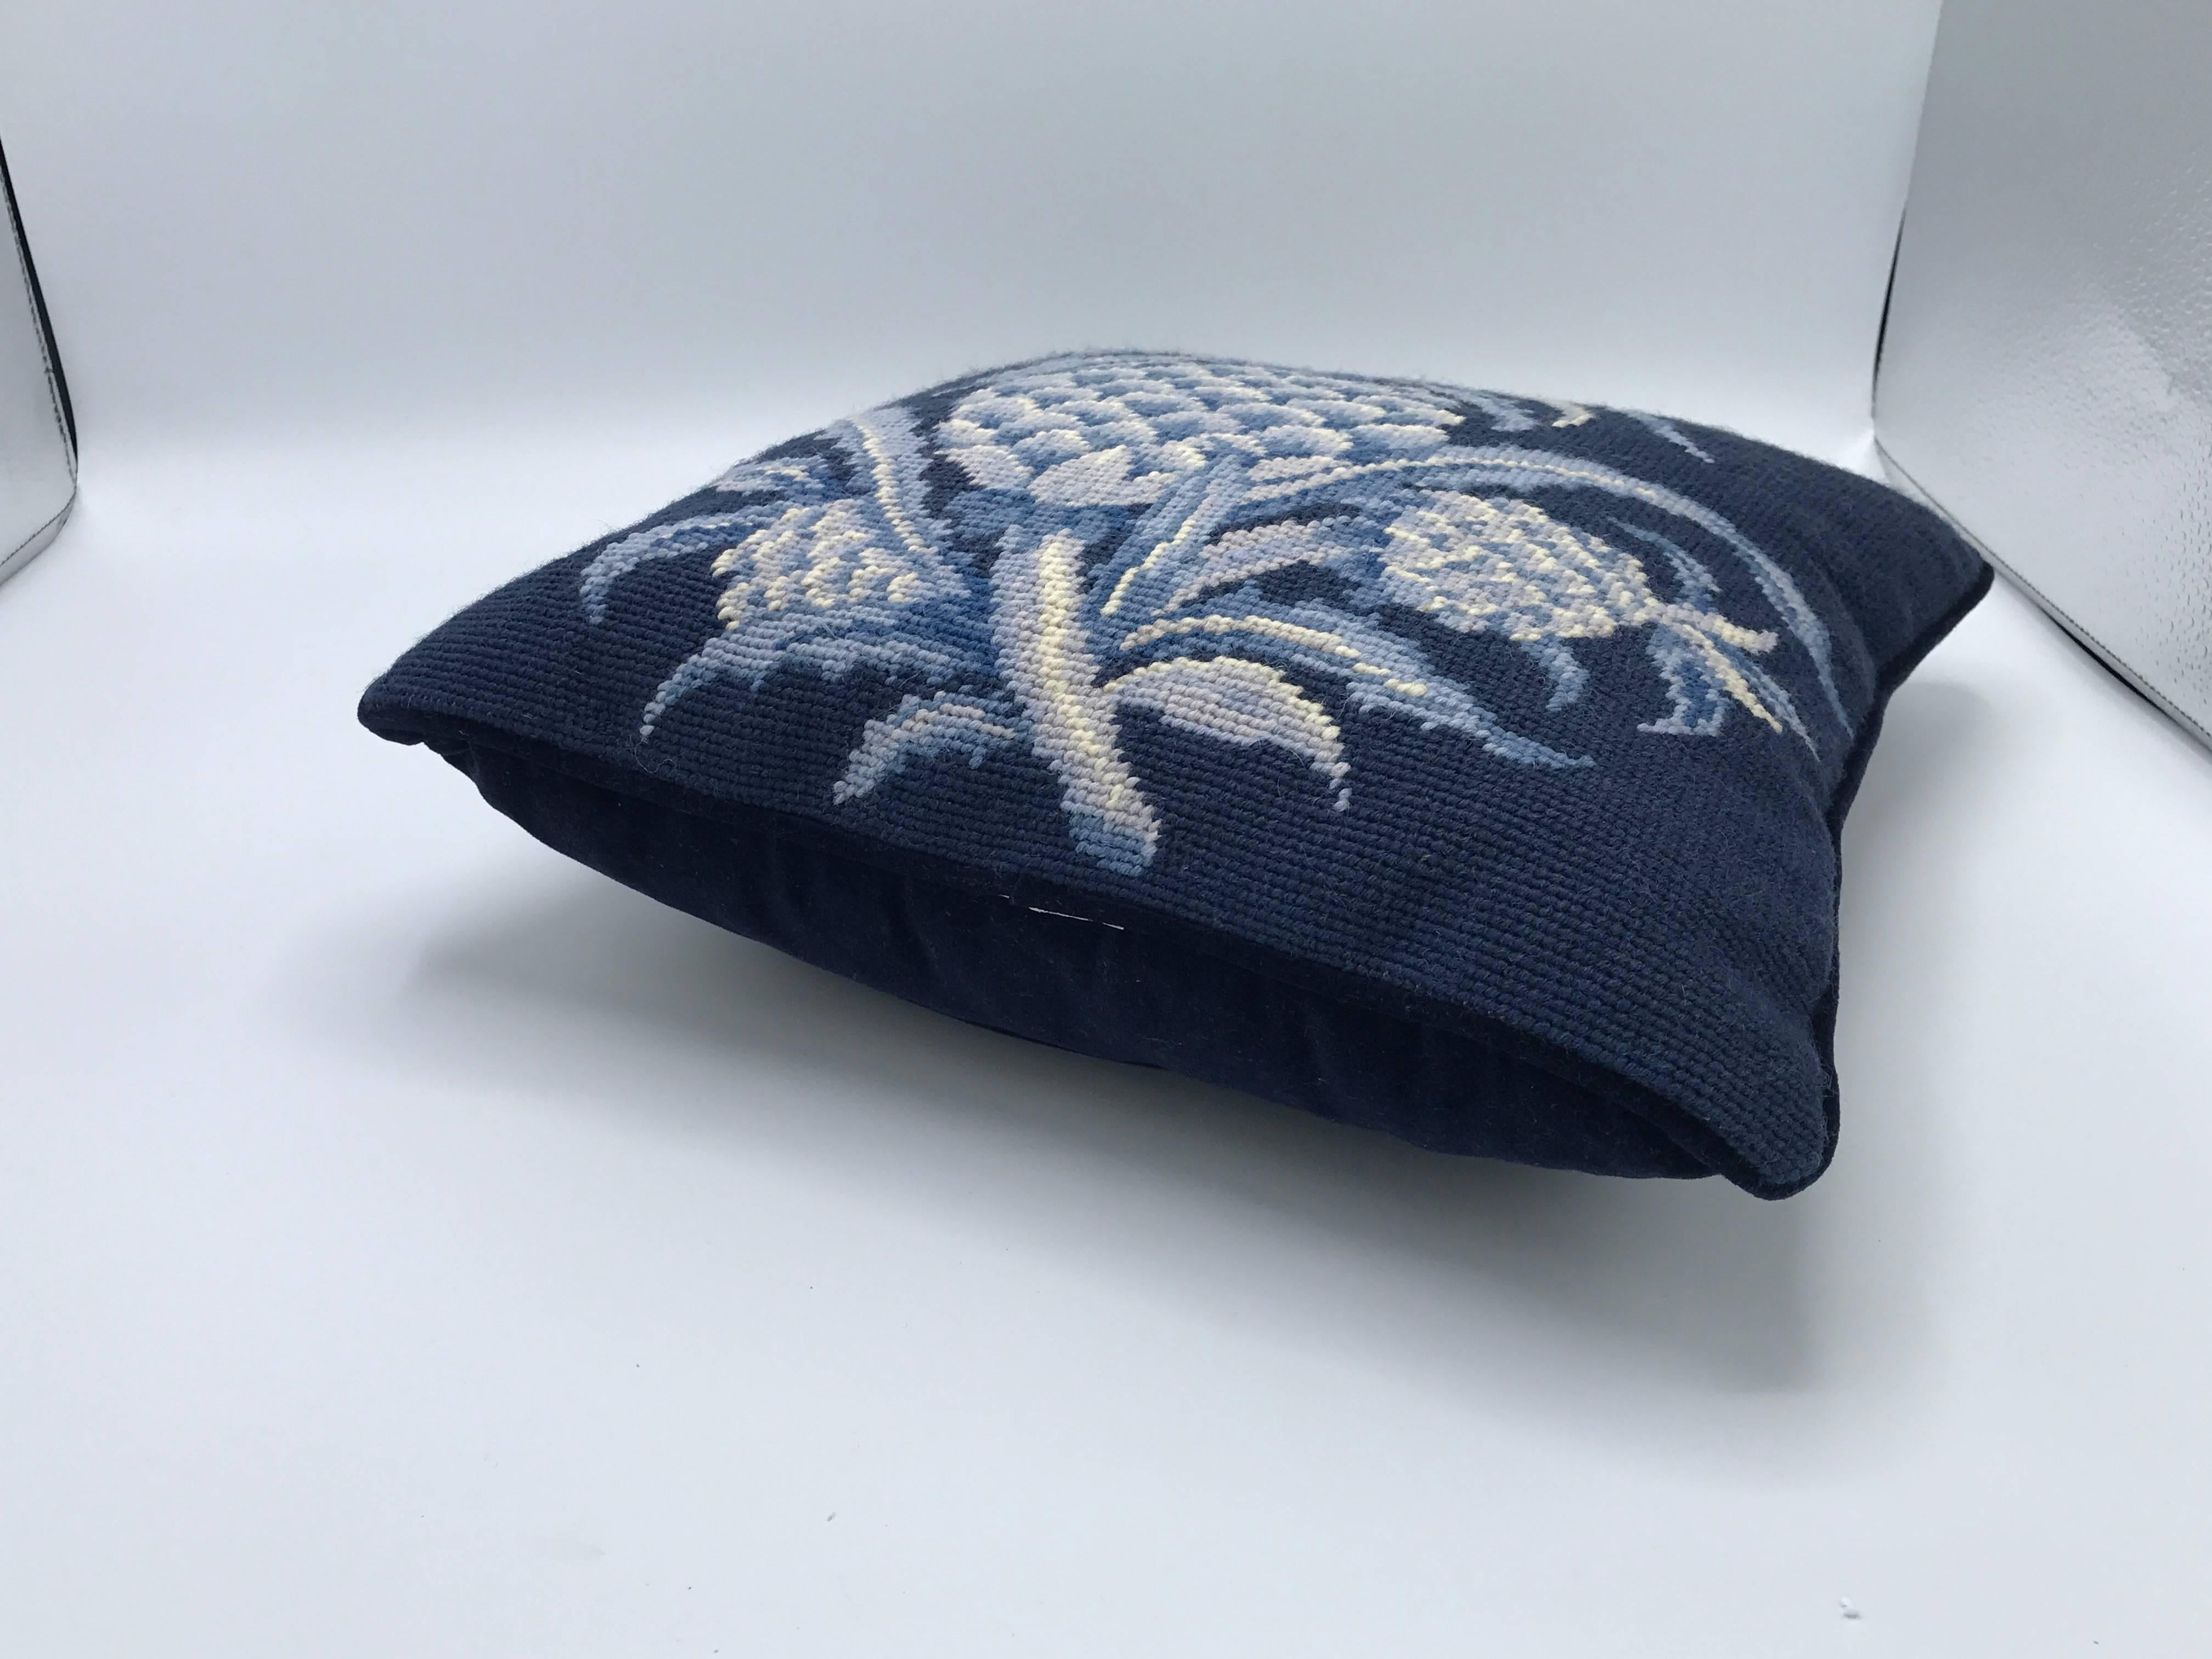 Chinoiserie 1980s Blue and White Pineapple Motif Needlepoint Pillows, Pair